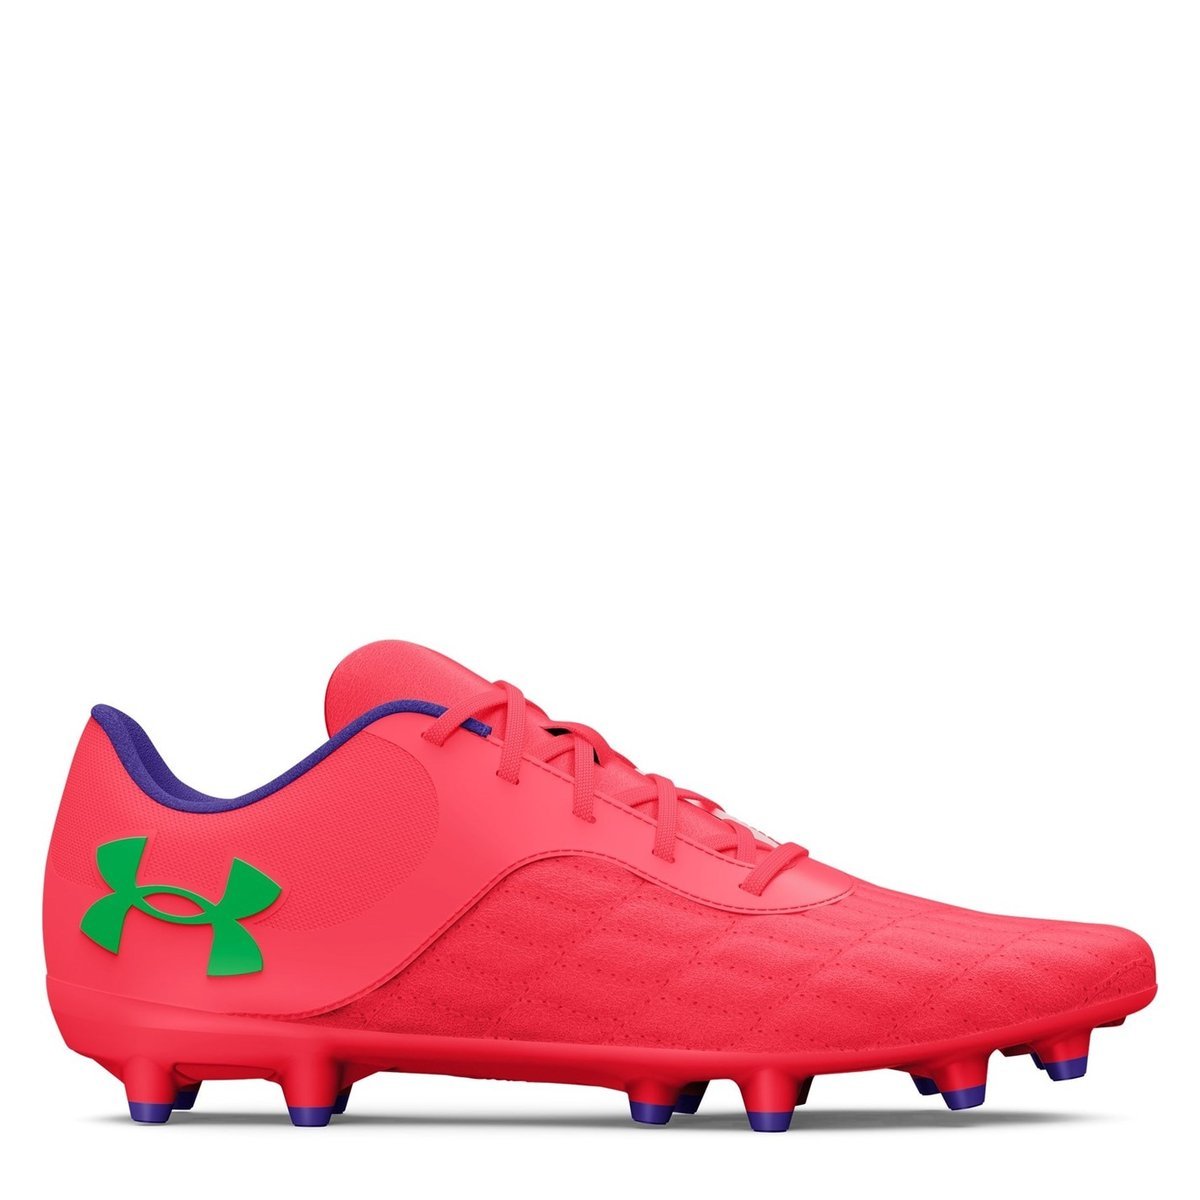 Under Armour Magnetico Control Soft Ground Football Boots